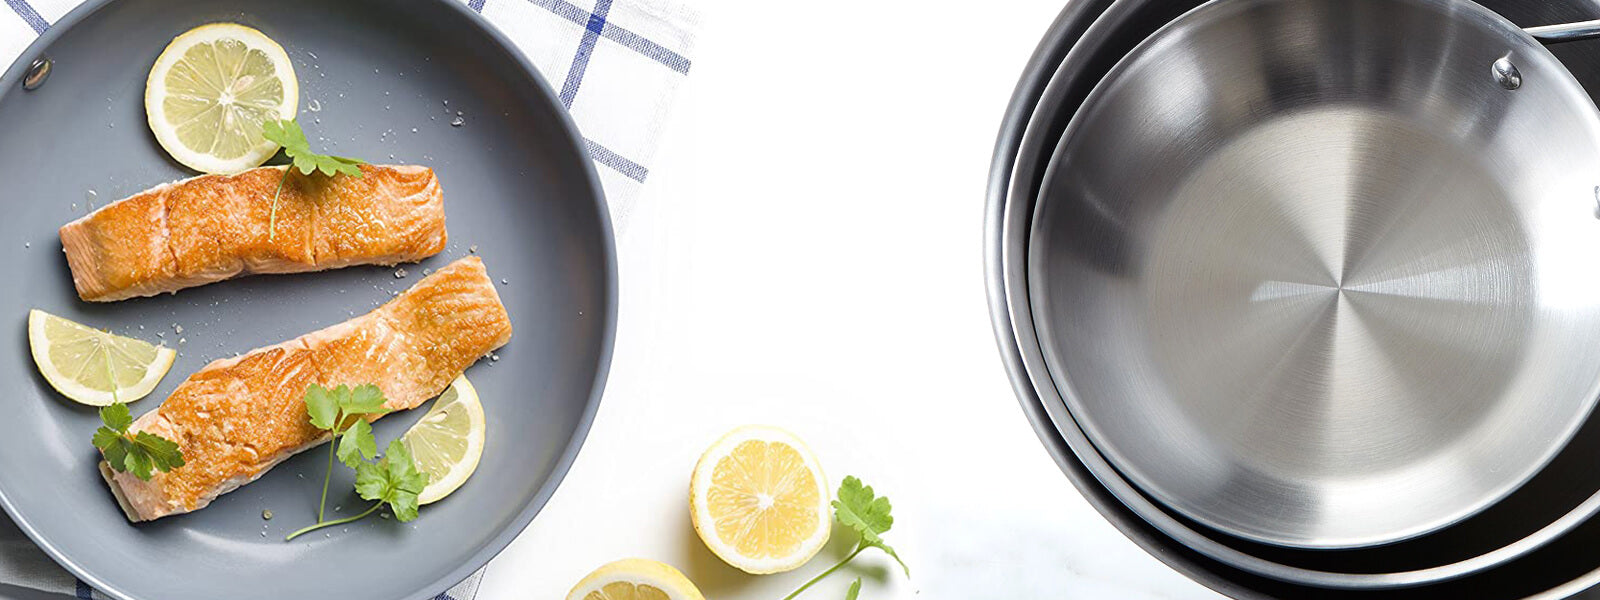 Ceramic Cookware vs. Stainless Steel: Which One Is Better?